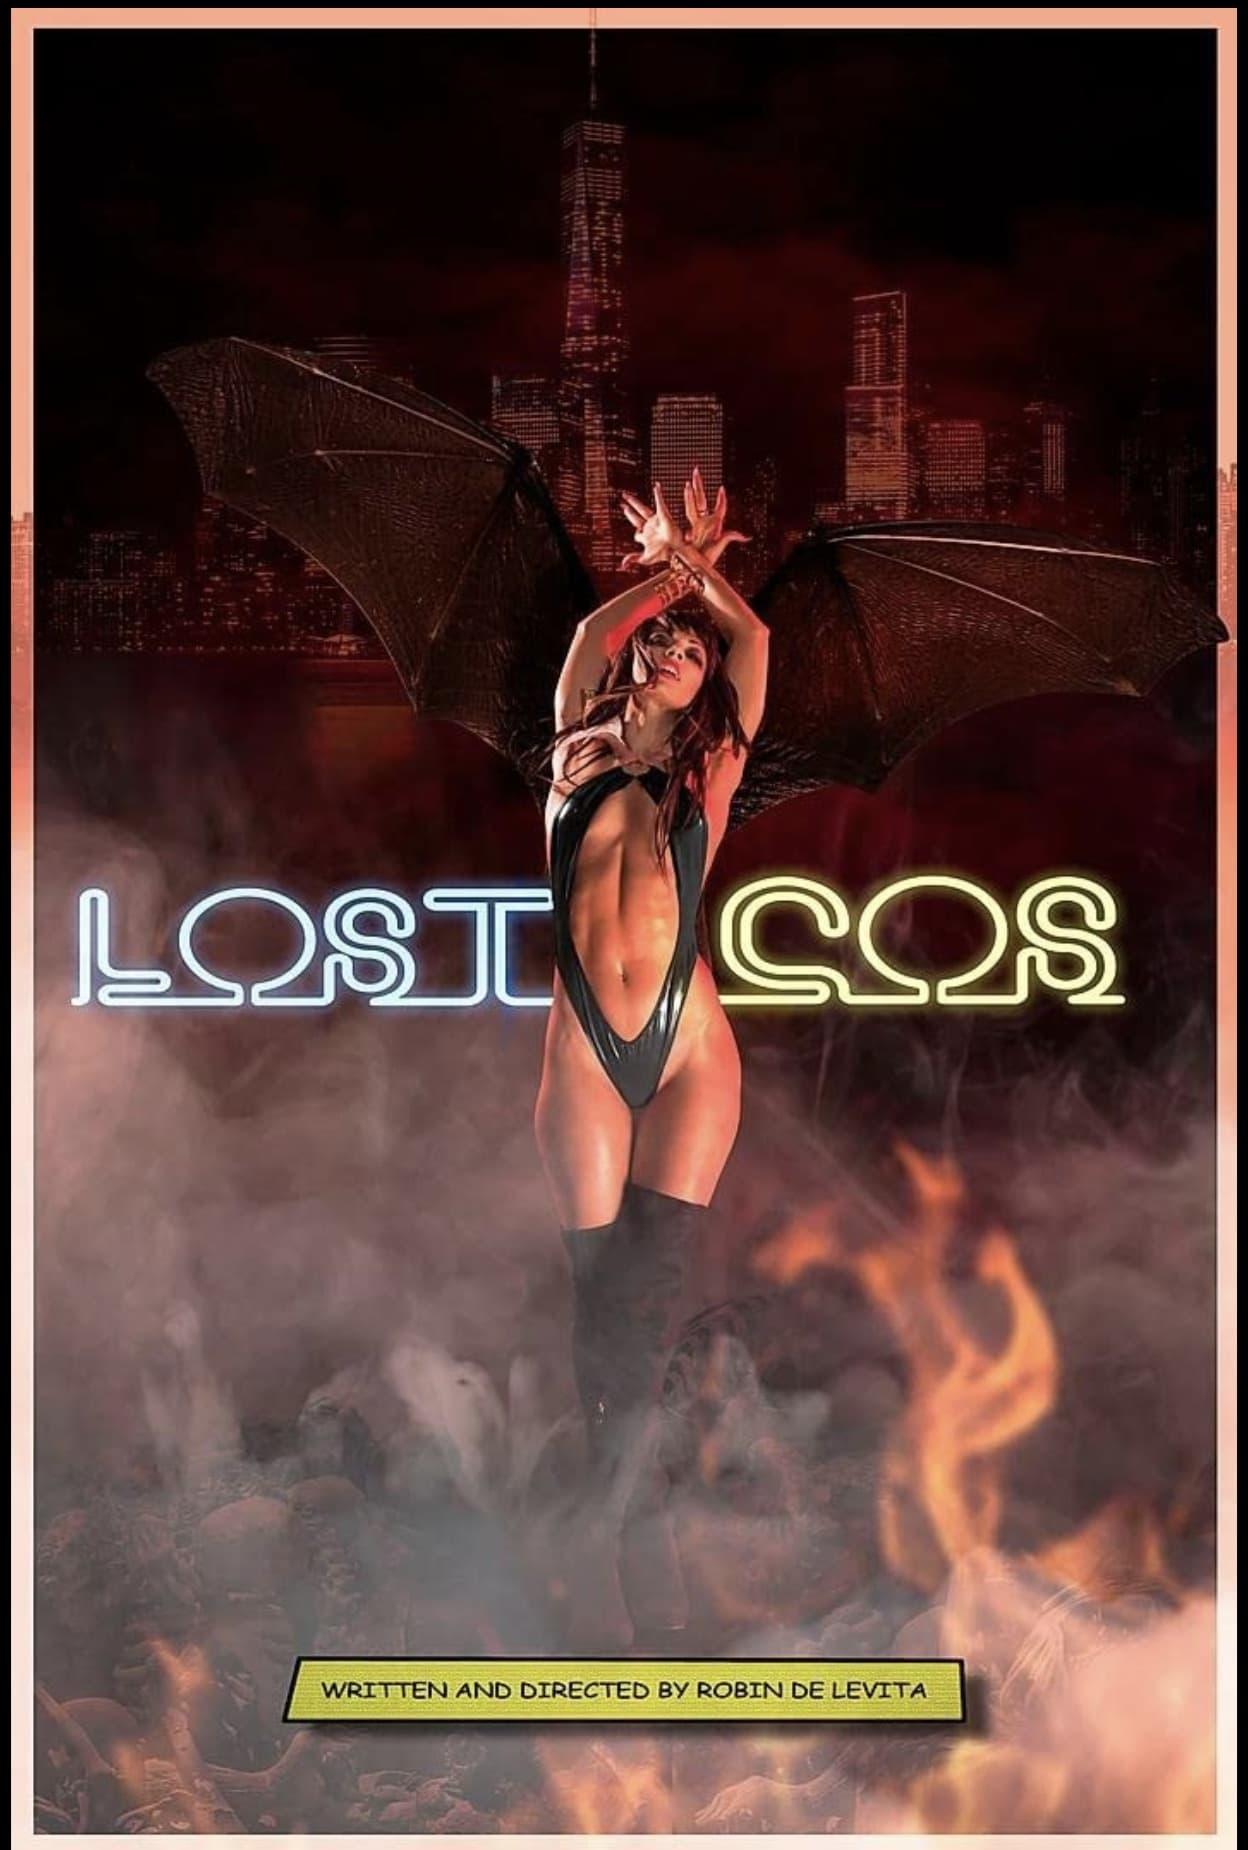 Lost Cos poster